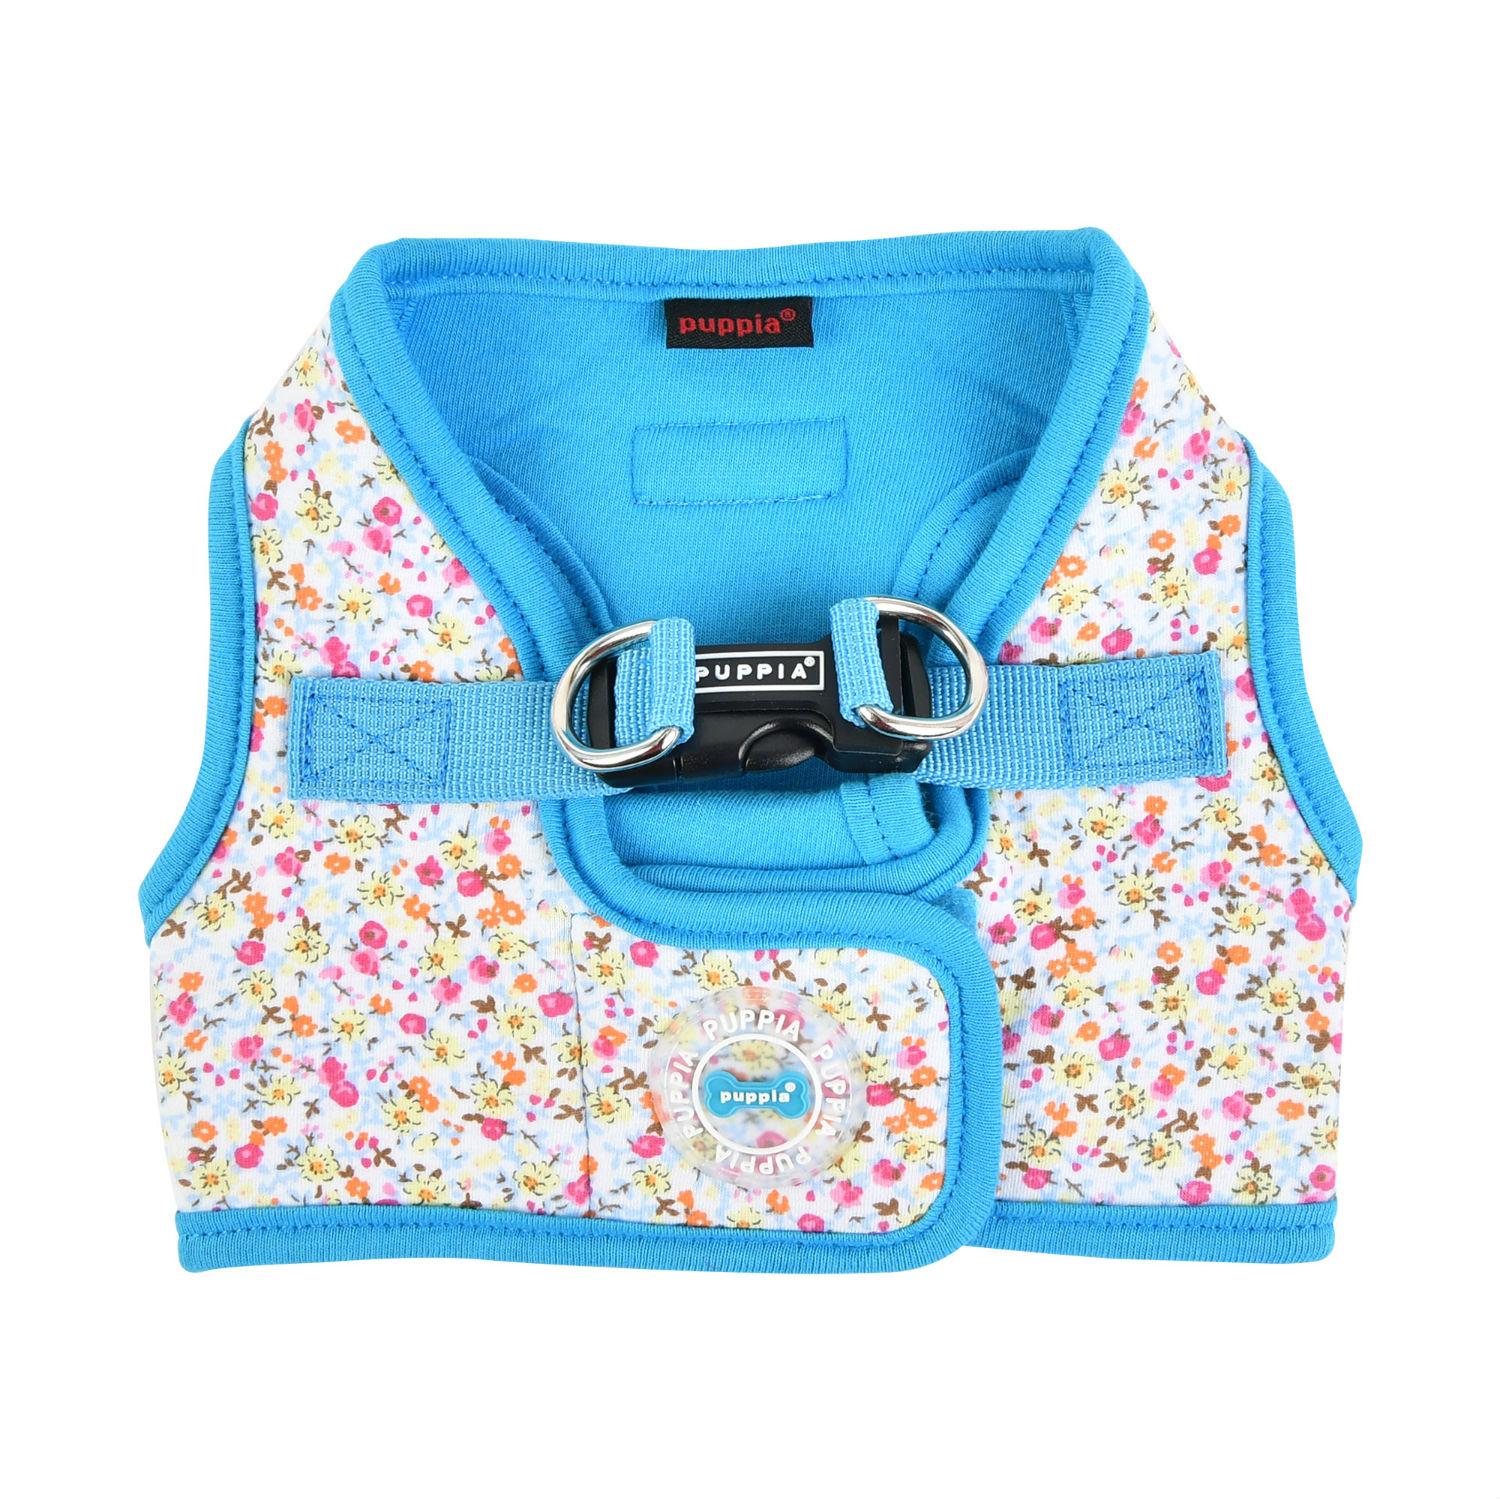 Wildflower Vest Dog Harness by Puppia - Sky Blue